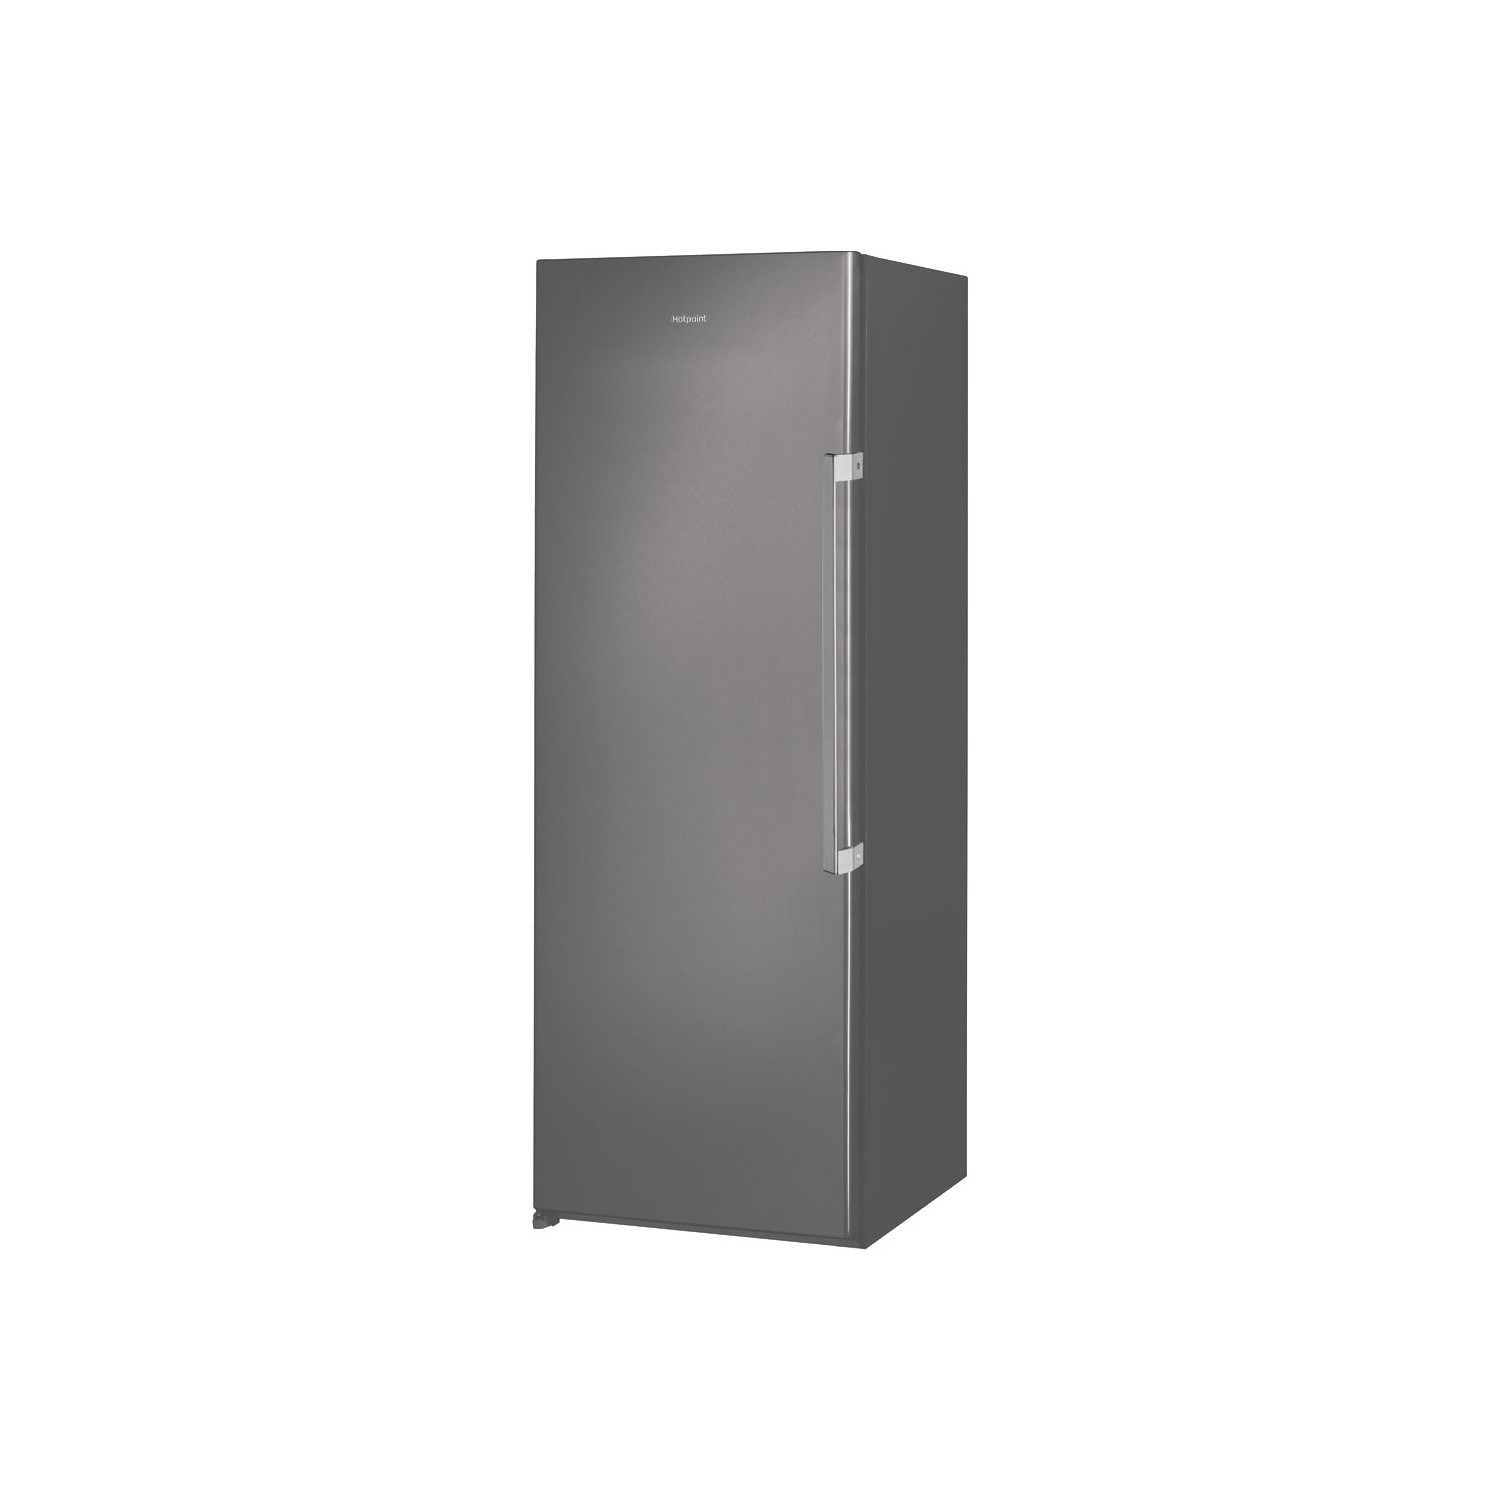 Hotpoint 22 Litre Upright Freestanding Frost Free Freezer - Graphite